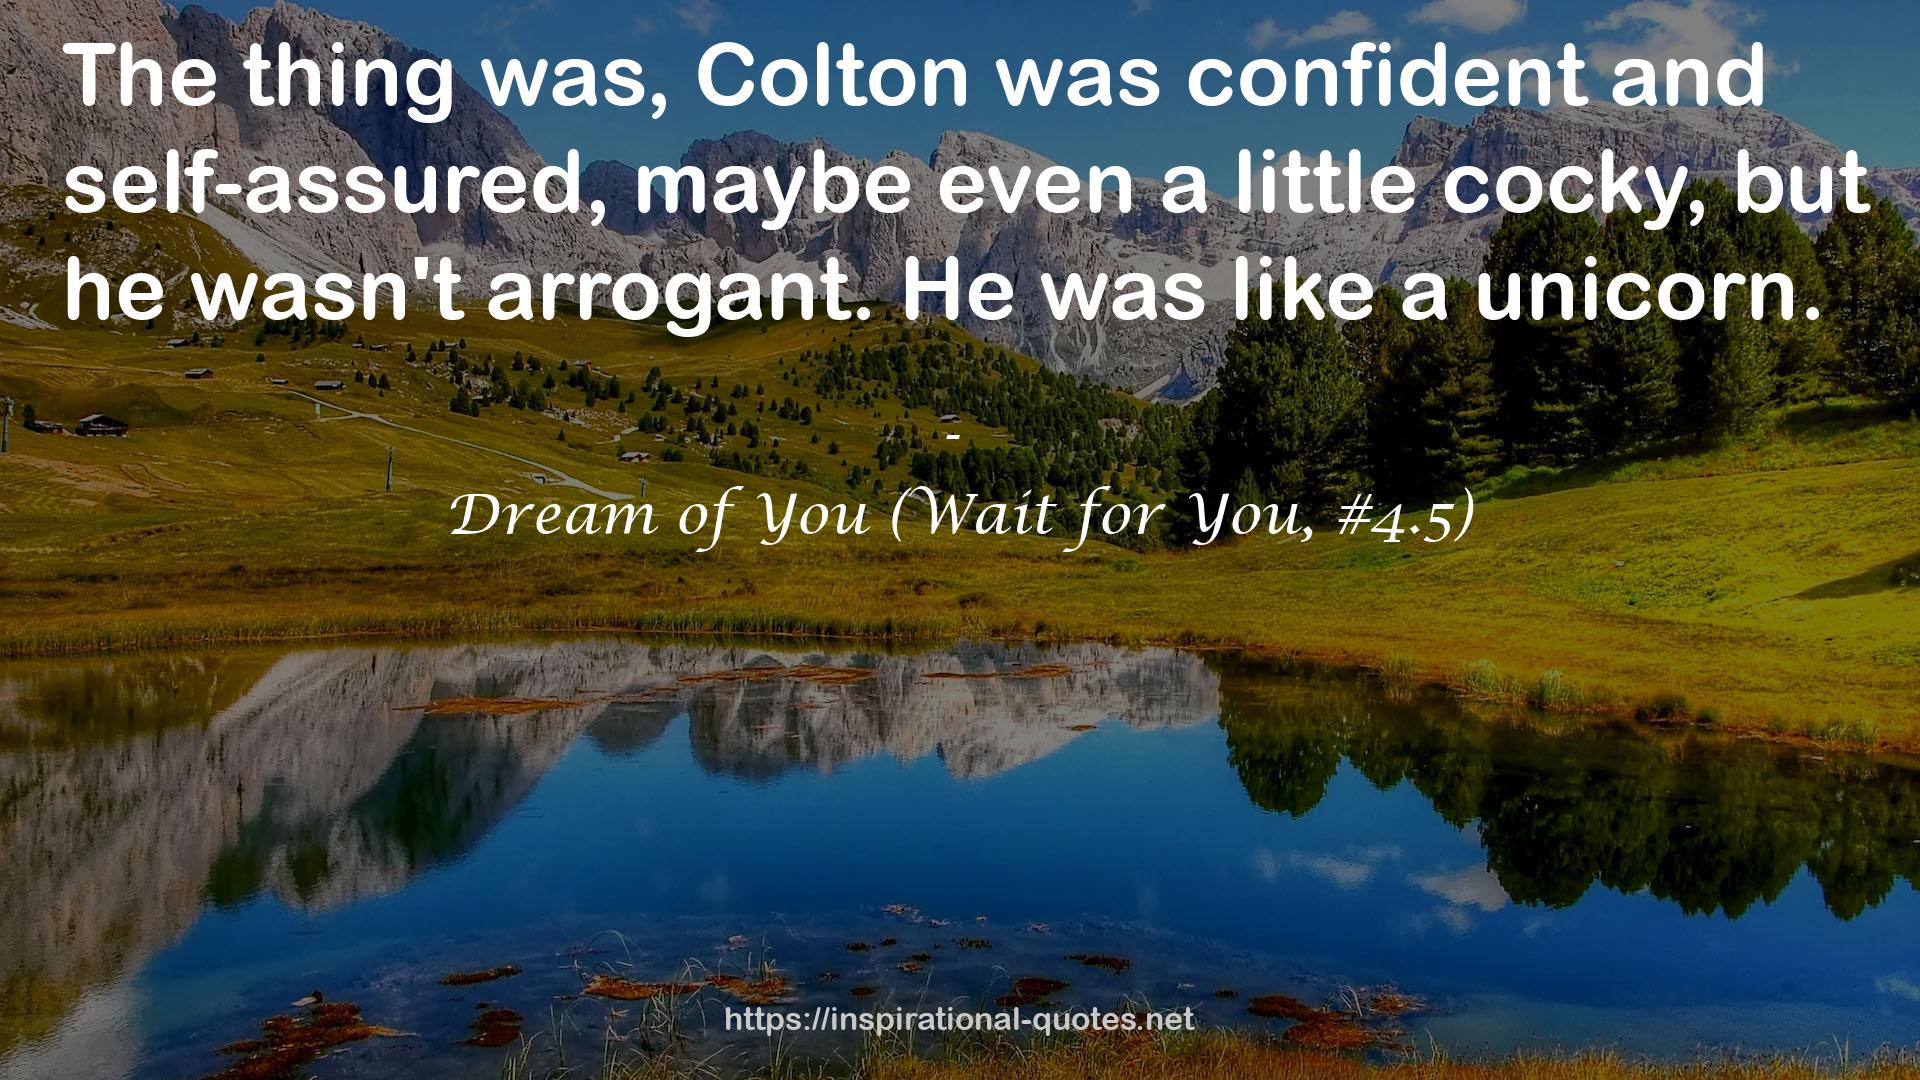 Dream of You (Wait for You, #4.5) QUOTES